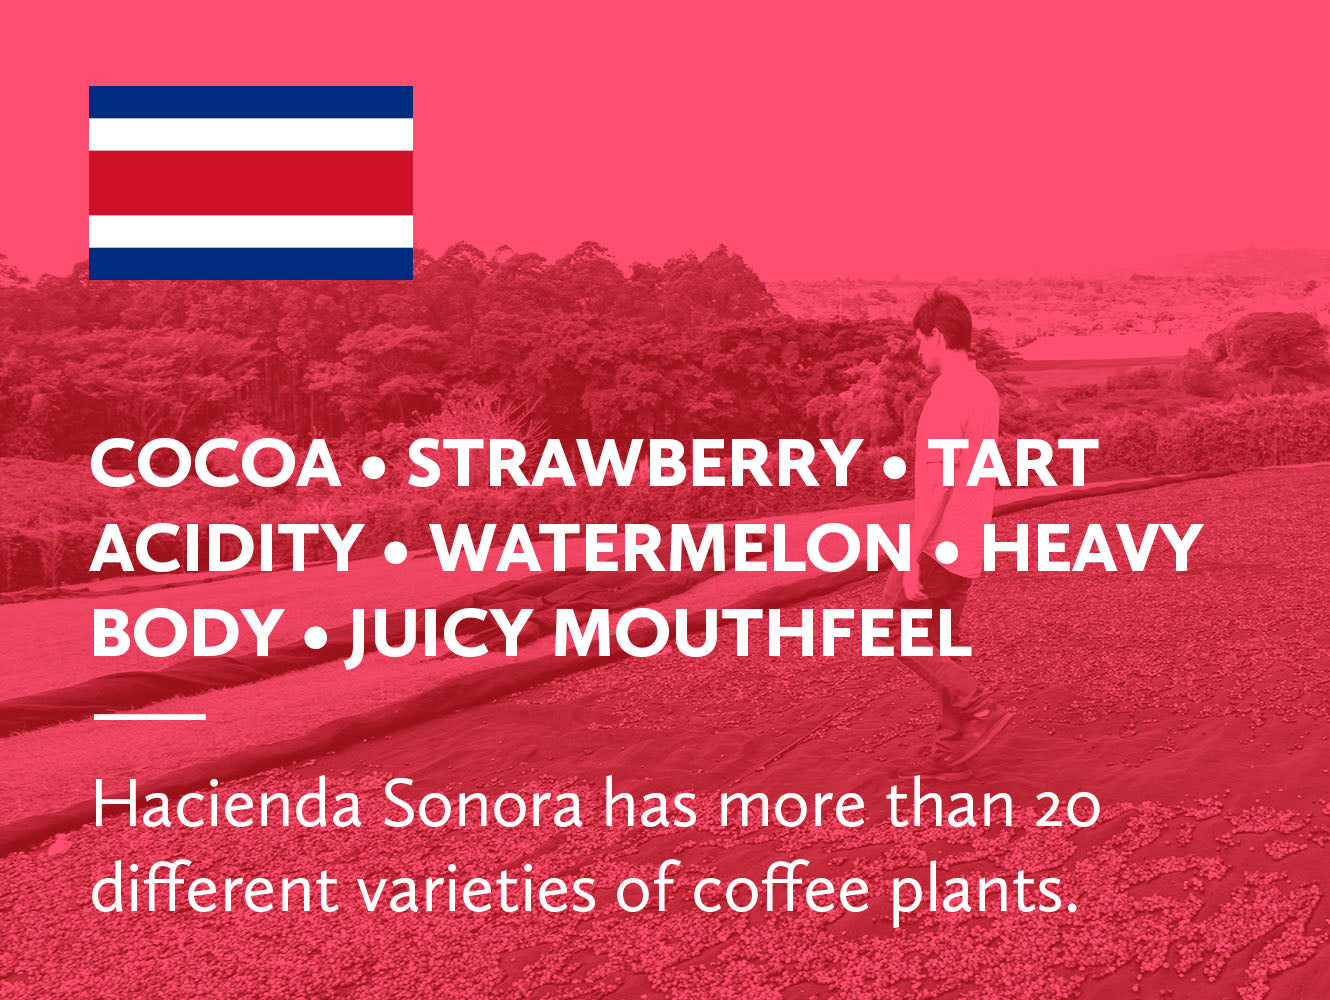 Photo of Hacienda Sonora farm with farmer crossing over coffee cherries drying. Cocoa • Strawberry • Tart Acidity • Watermelon • Heavy Body • Juicy Mouthfeel. Hacienda Sonora has more than 20 different varieties of coffee plants.